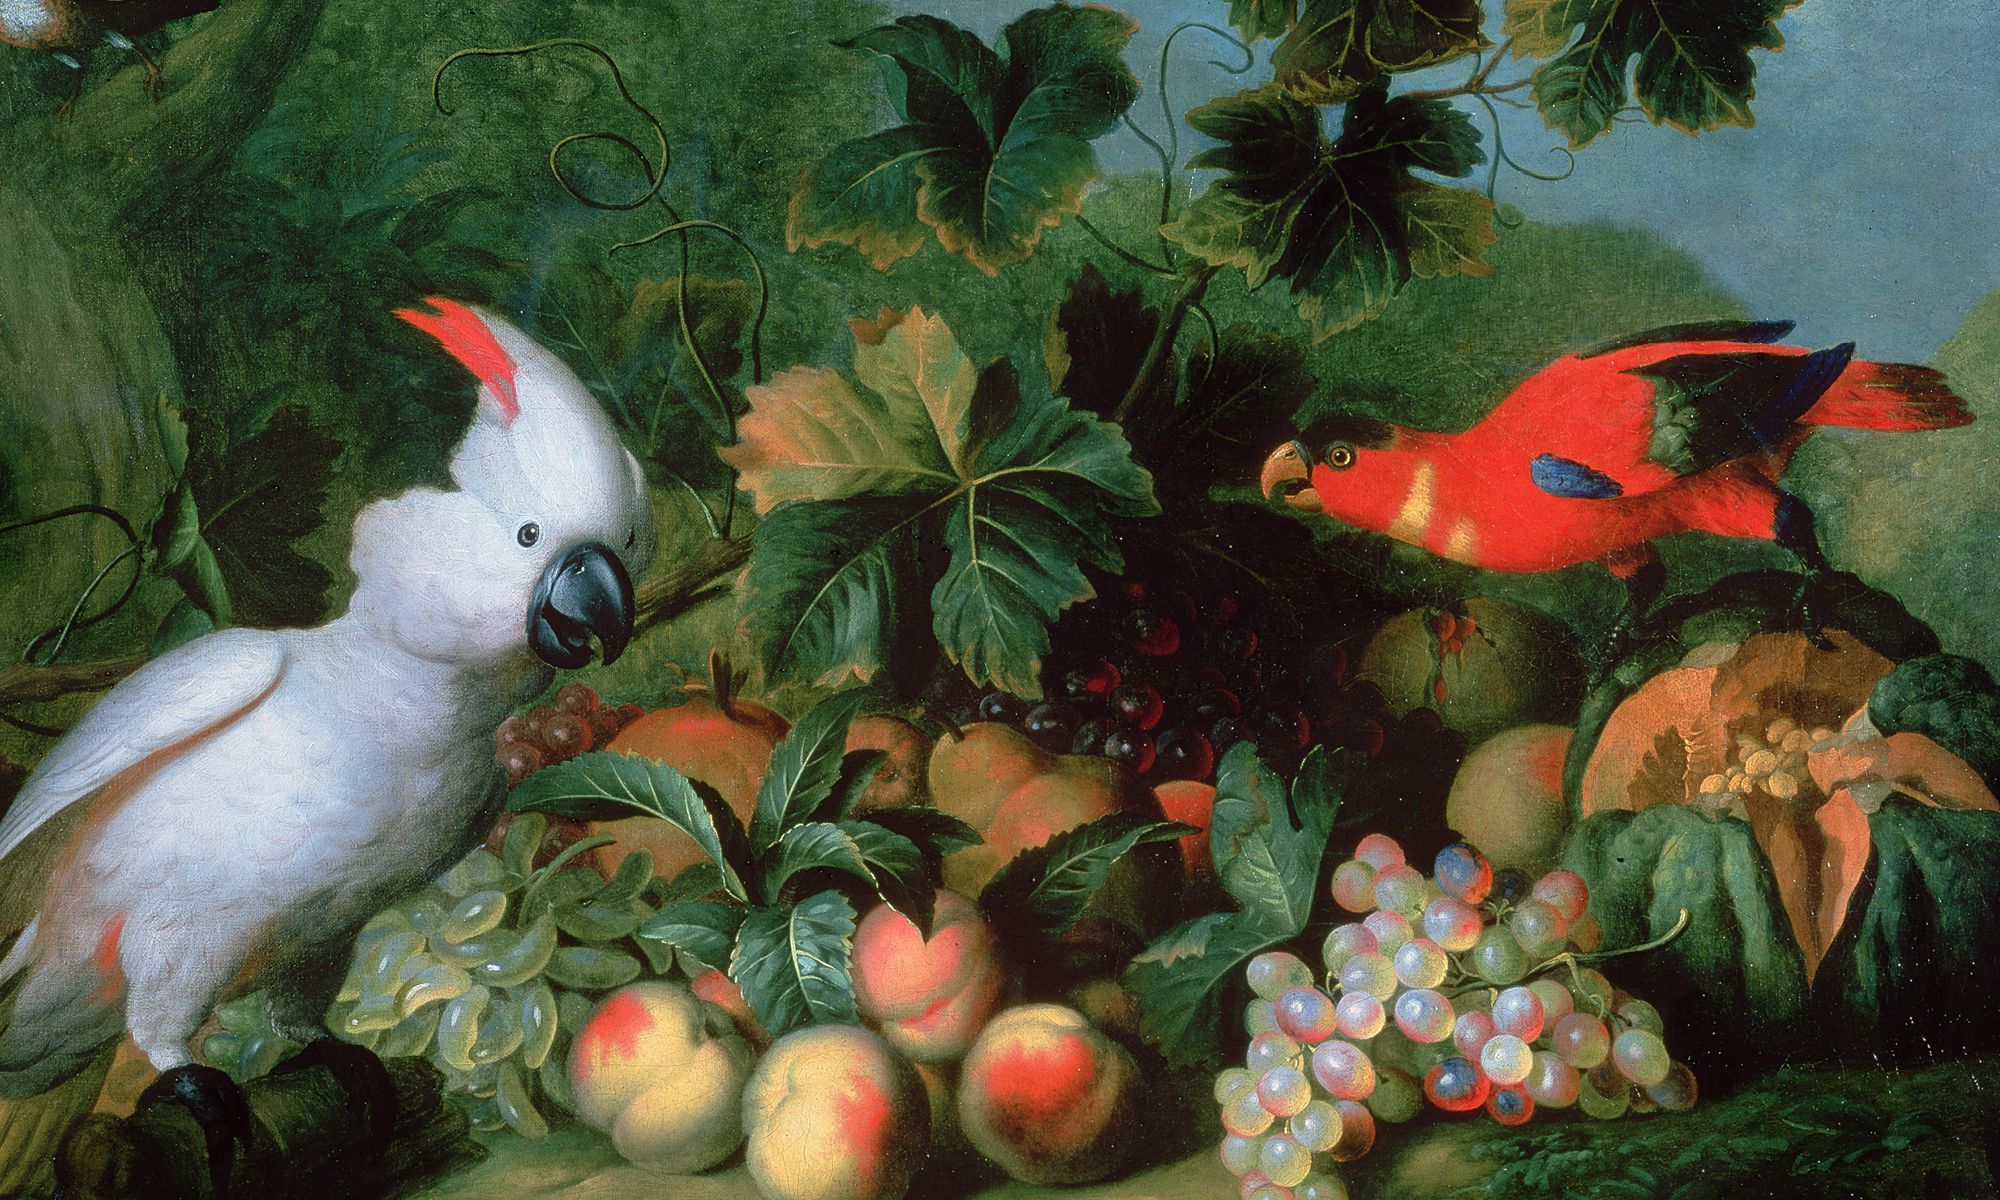 Image featuring colorful parrots, grapes and peaches on a green leafy background